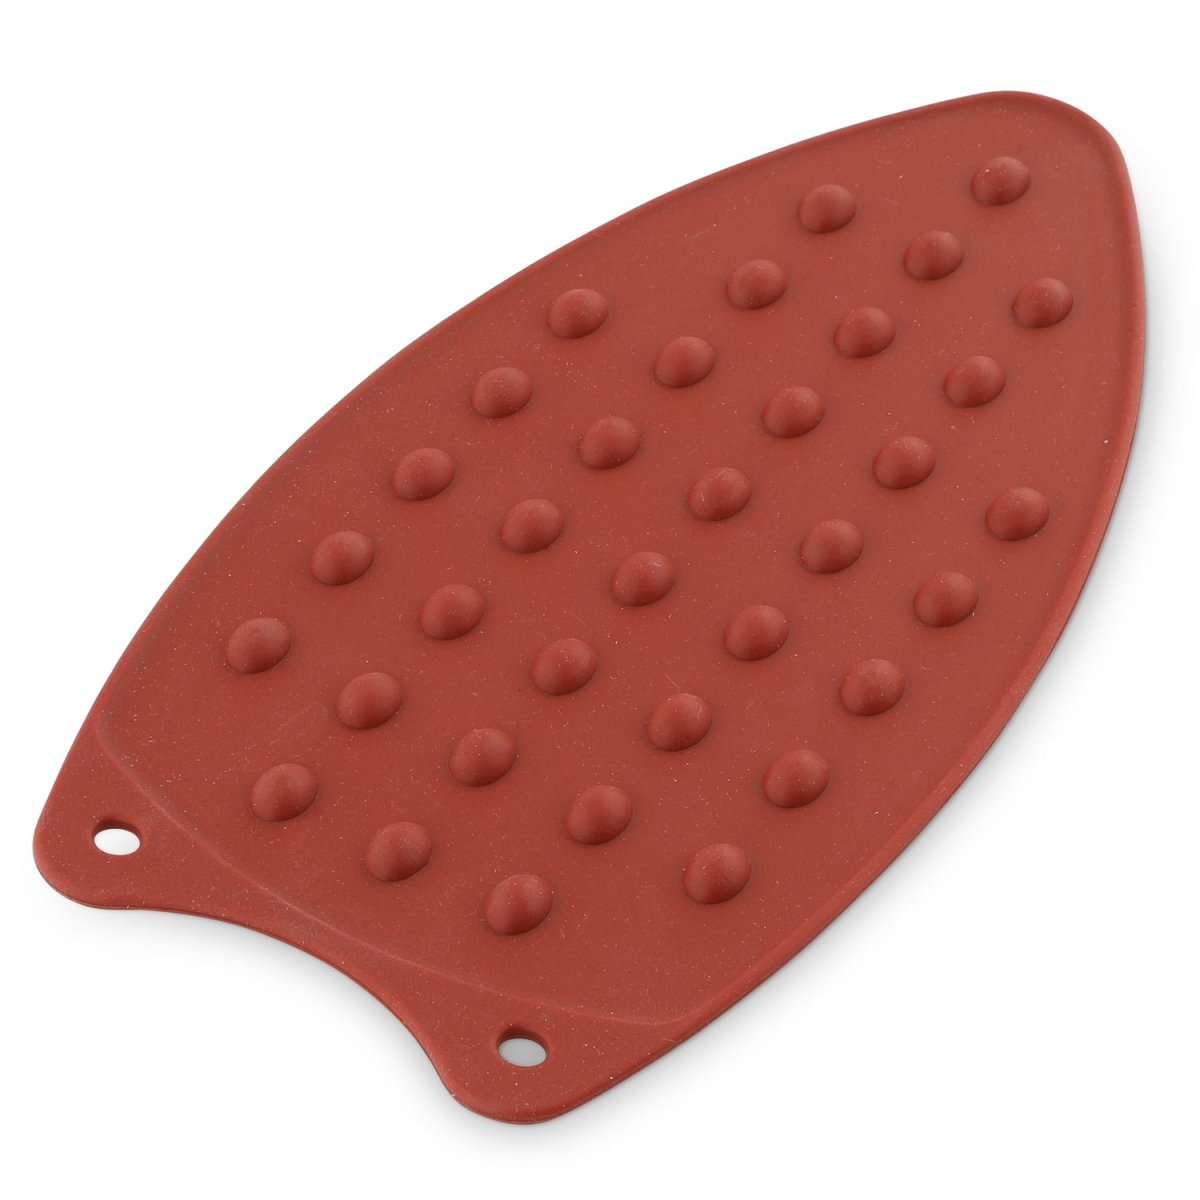 Top view of  the MadamSew Silicone Iron Rest